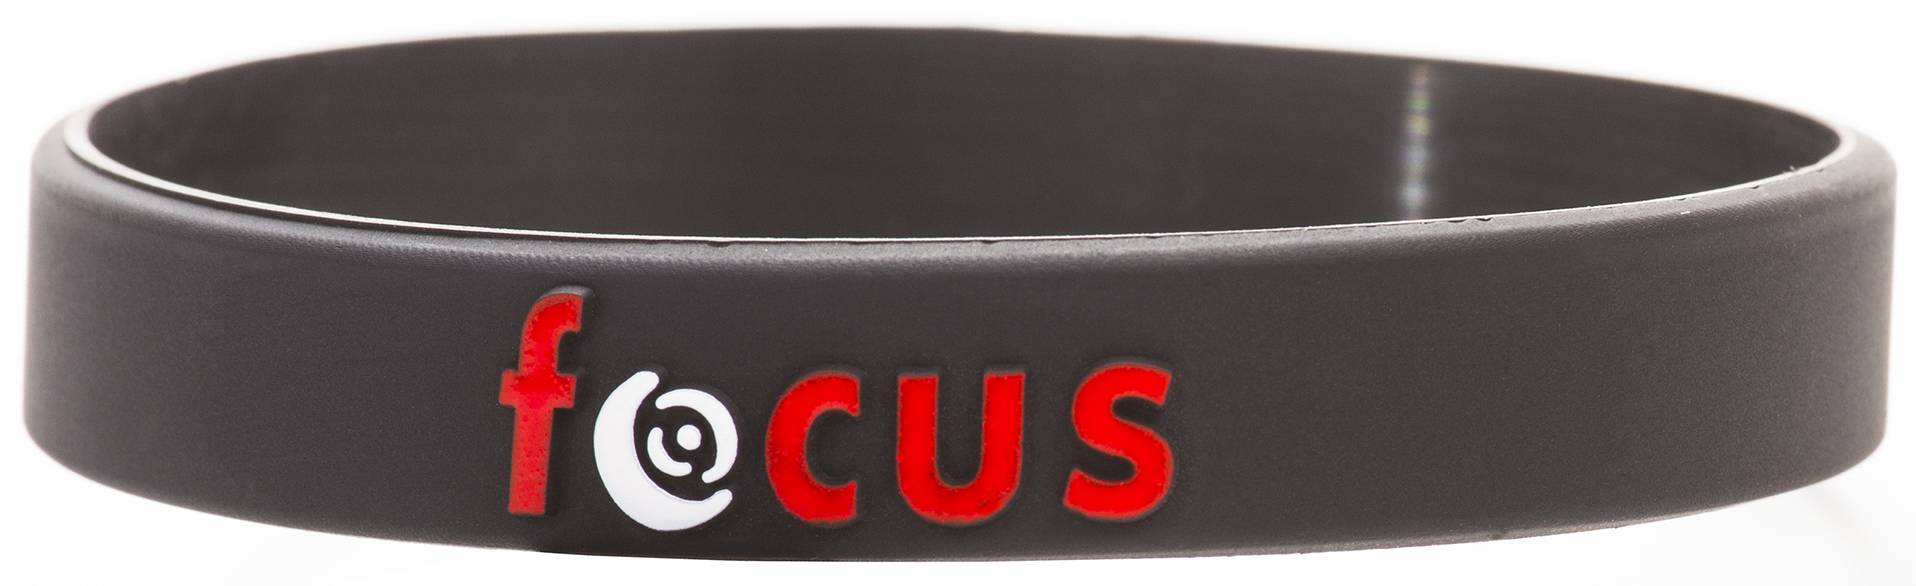 Focus Silicone Band for Zoom Lenses